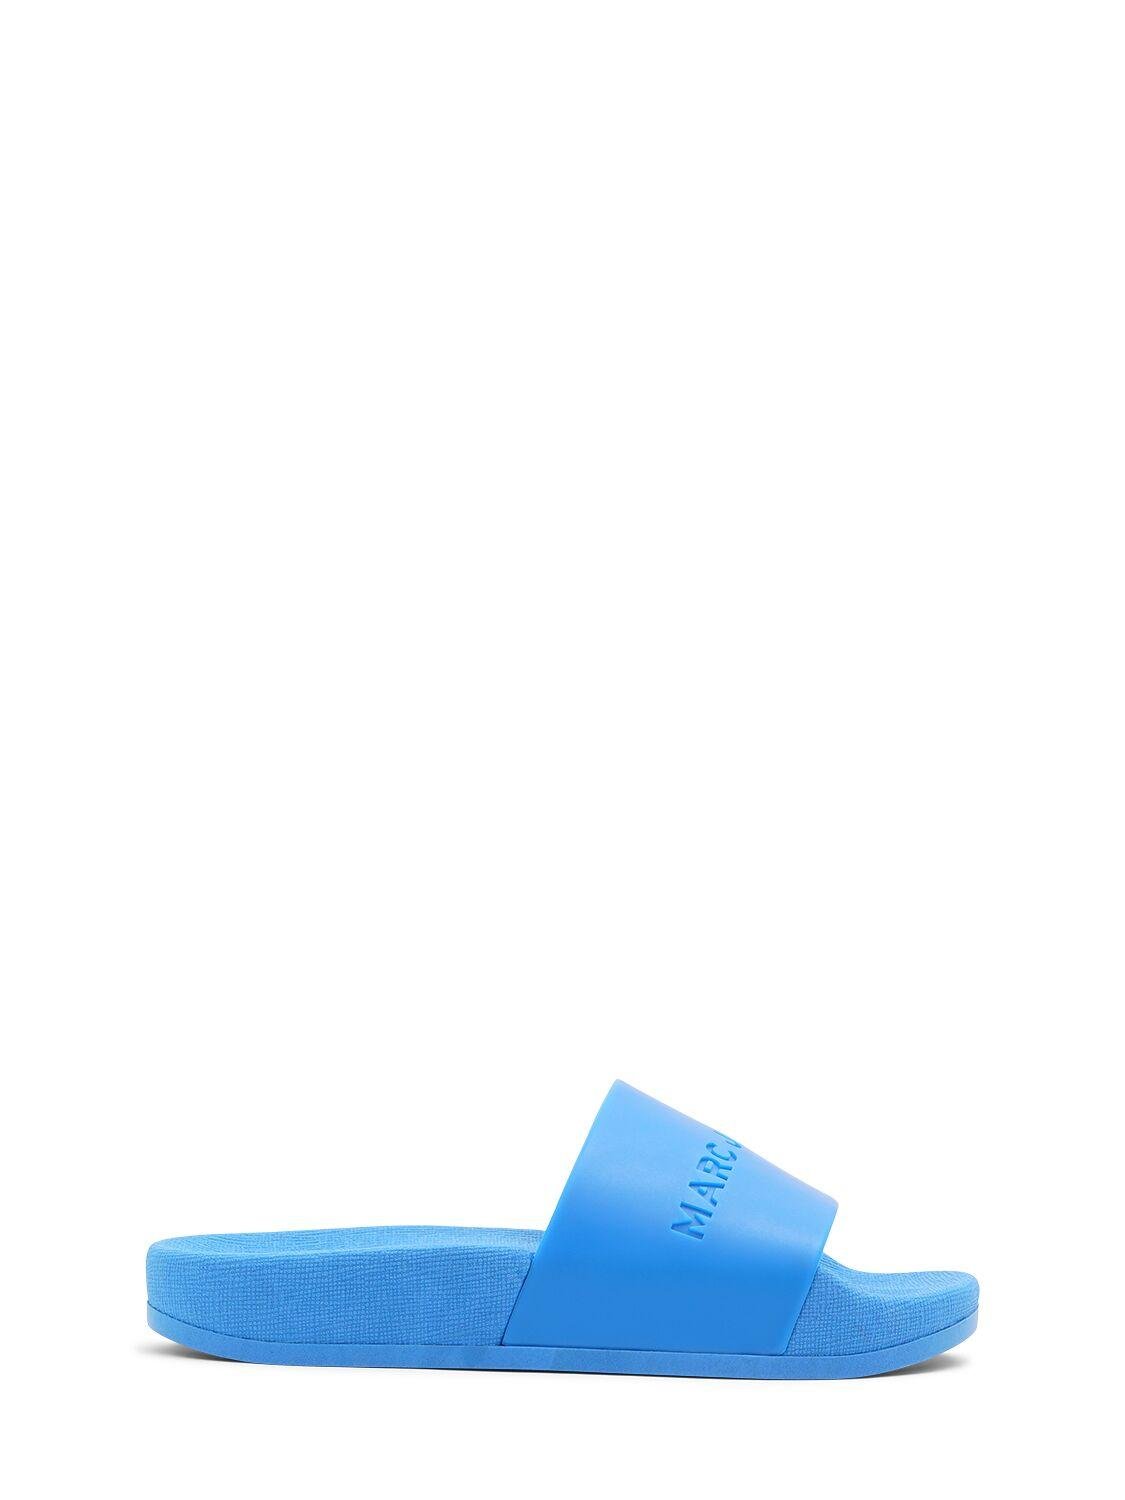 Monochromatic Rubber Slides by MARC JACOBS